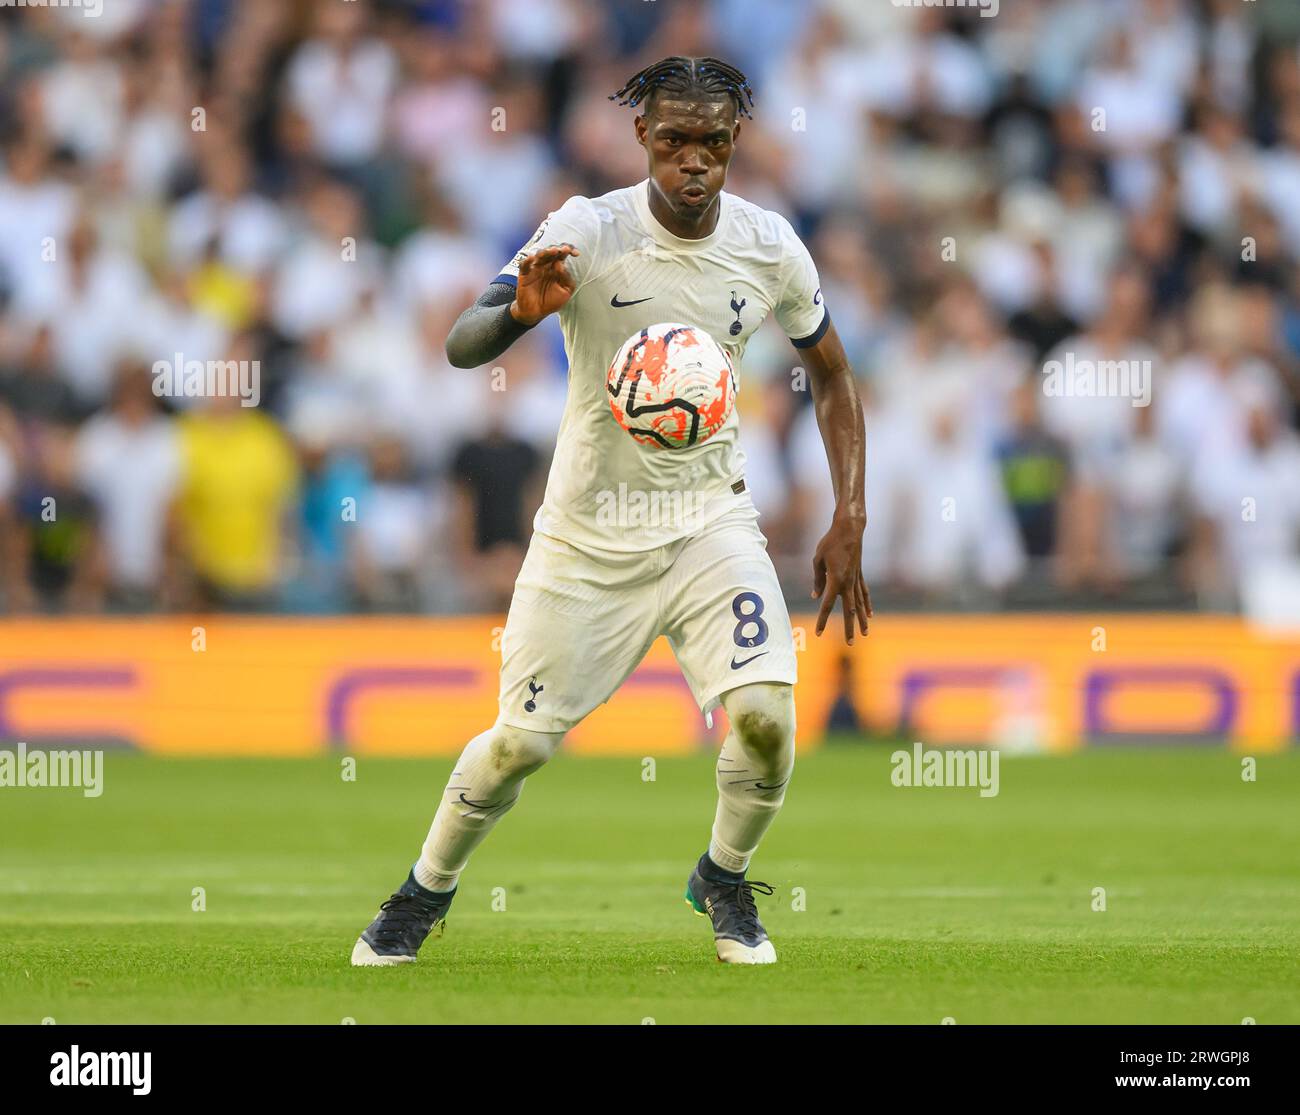 Yves Bissouma #38 of Tottenham Hotspur during the game Stock Photo - Alamy